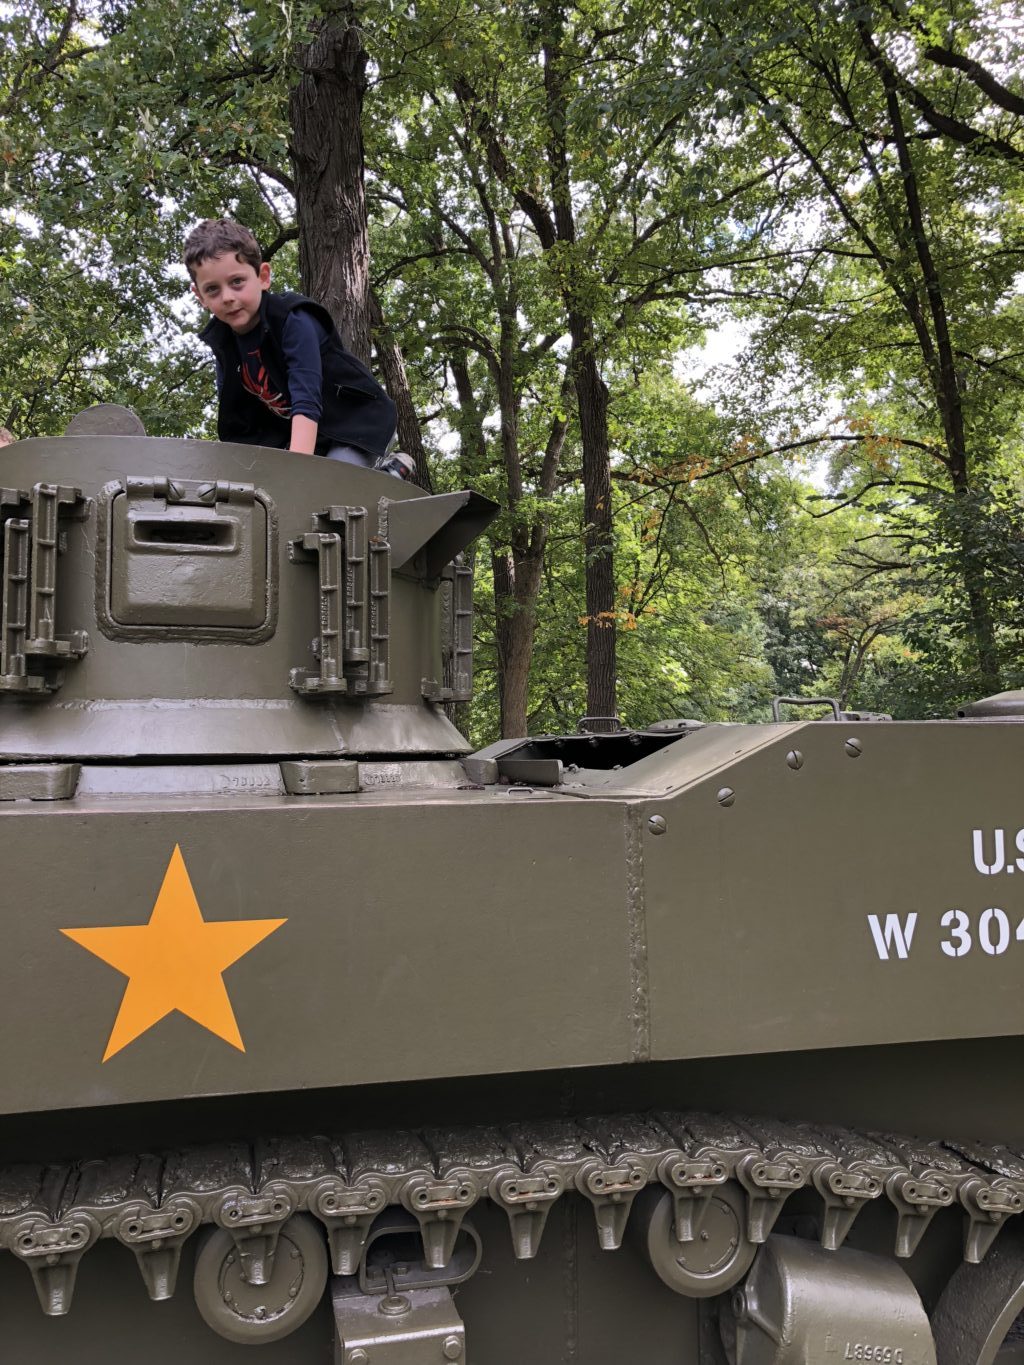 Fun Family Field Trip: Cantigny Park | Tips to explore the gardens and park with kids in tow